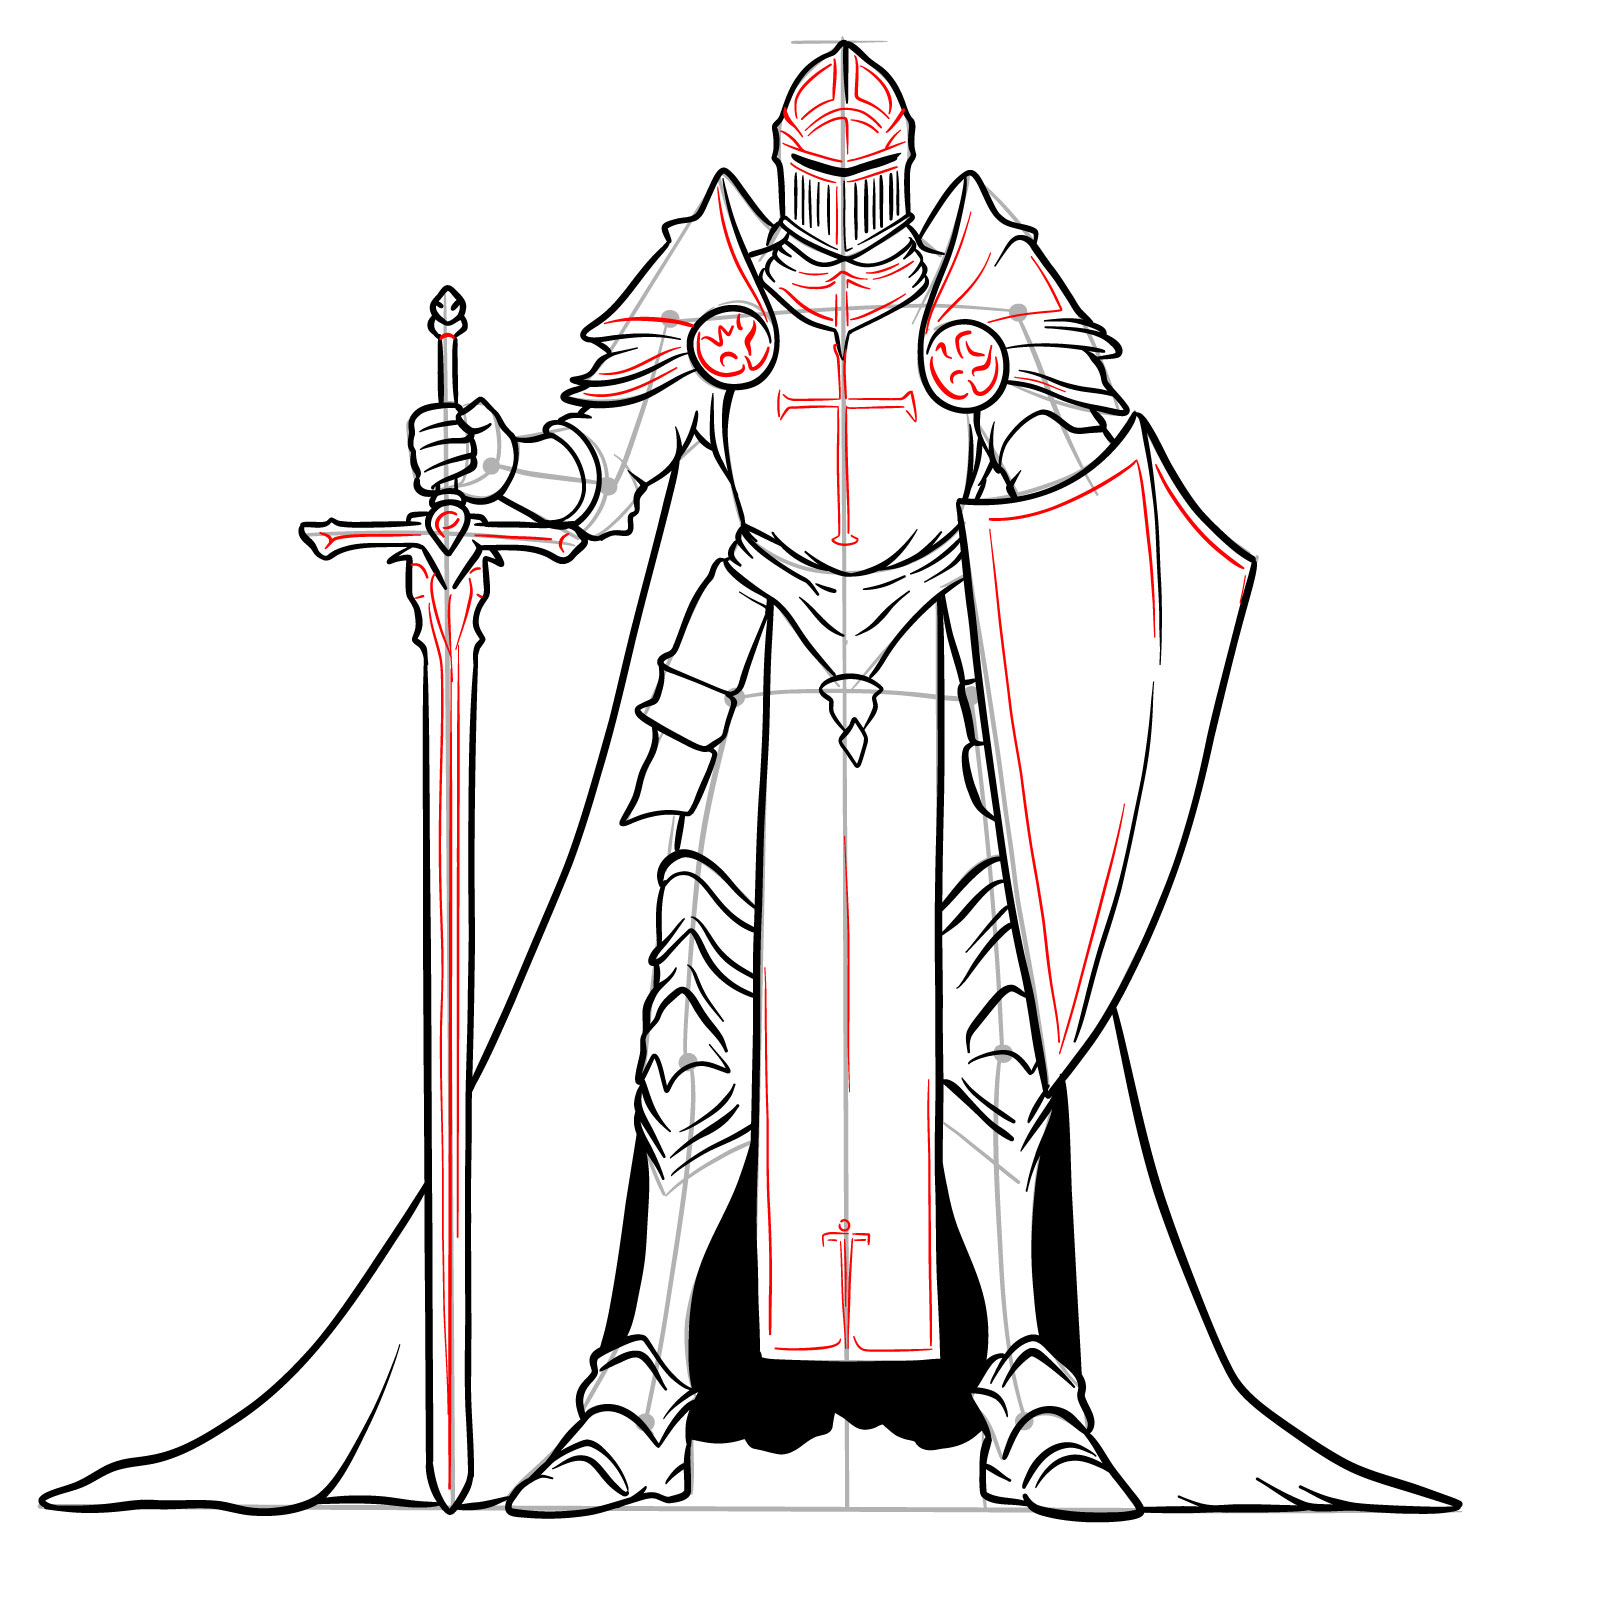 Realistic male paladin drawing step 21: detailing armor and cloth